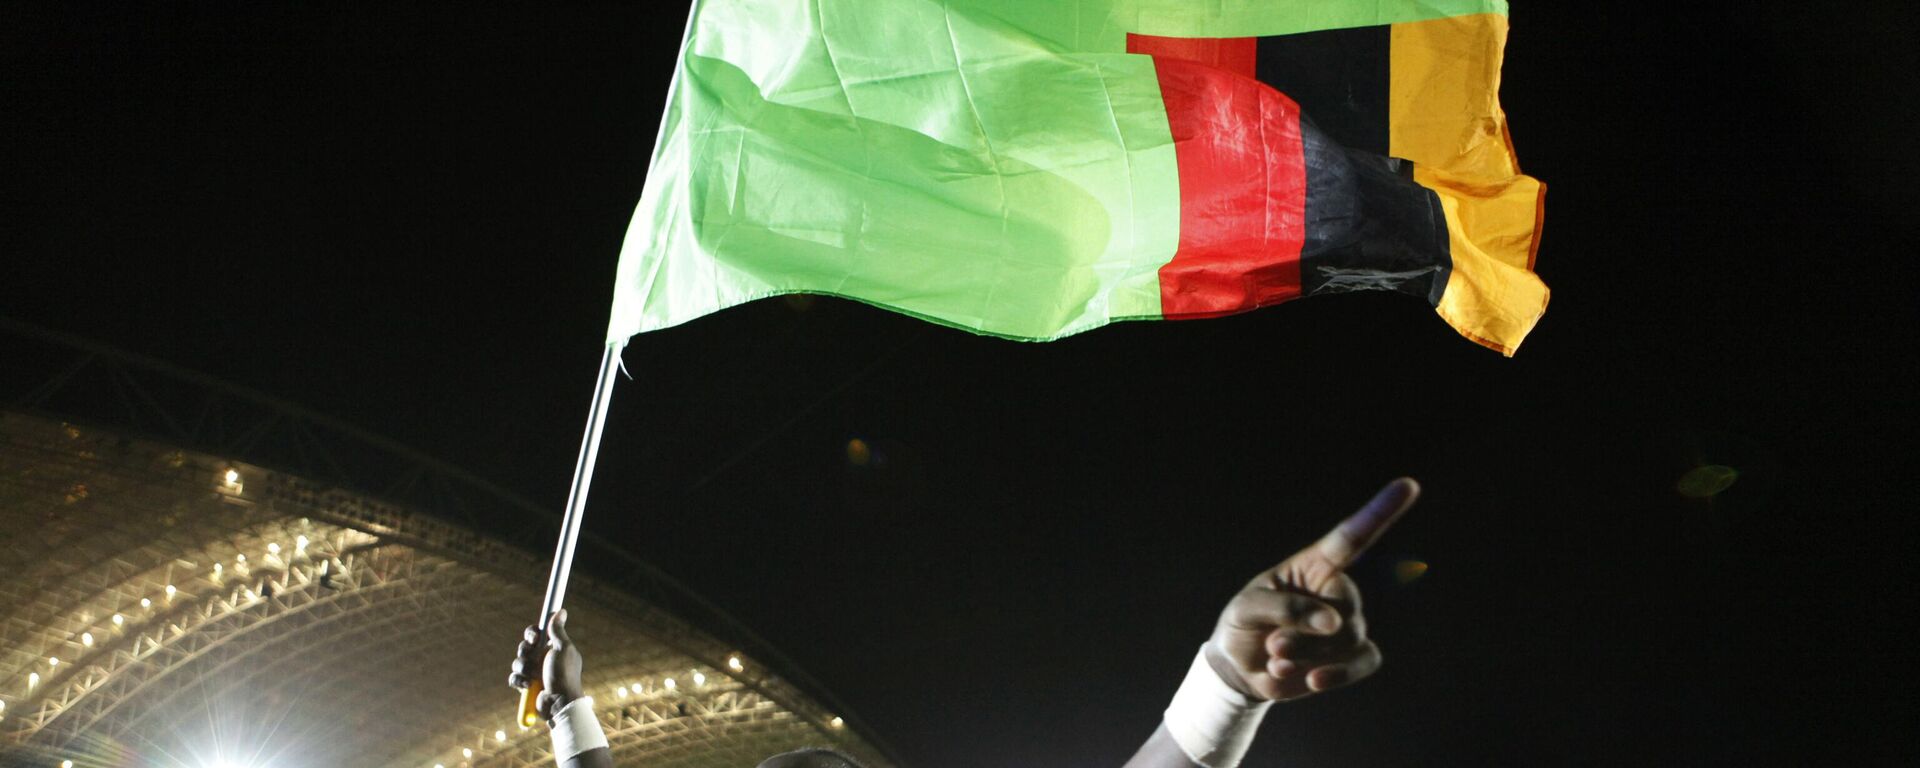 Zambia's goalkeeper Kennedy Mweene carries a Zambia flag as he celebrates his team winning the African Cup of Nations, after beating Ivory Coast in the tournament final soccer match at Stade de l'Amitie in Libreville, Gabon Sunday, Feb. 12, 2012. - Sputnik Africa, 1920, 12.03.2023